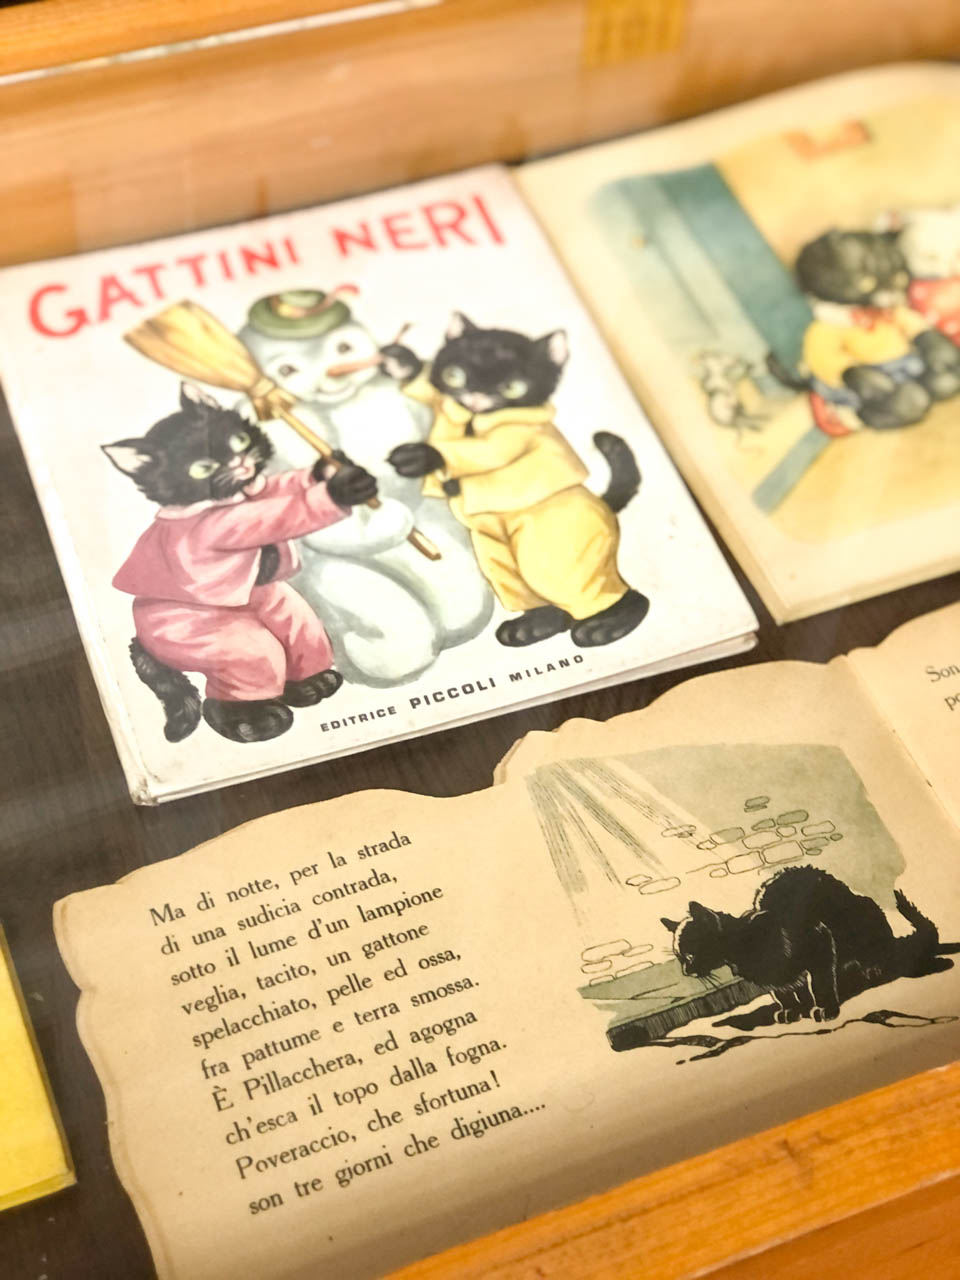 Cat illustrations on display at the Cat Museum in Kotor, Montenegro